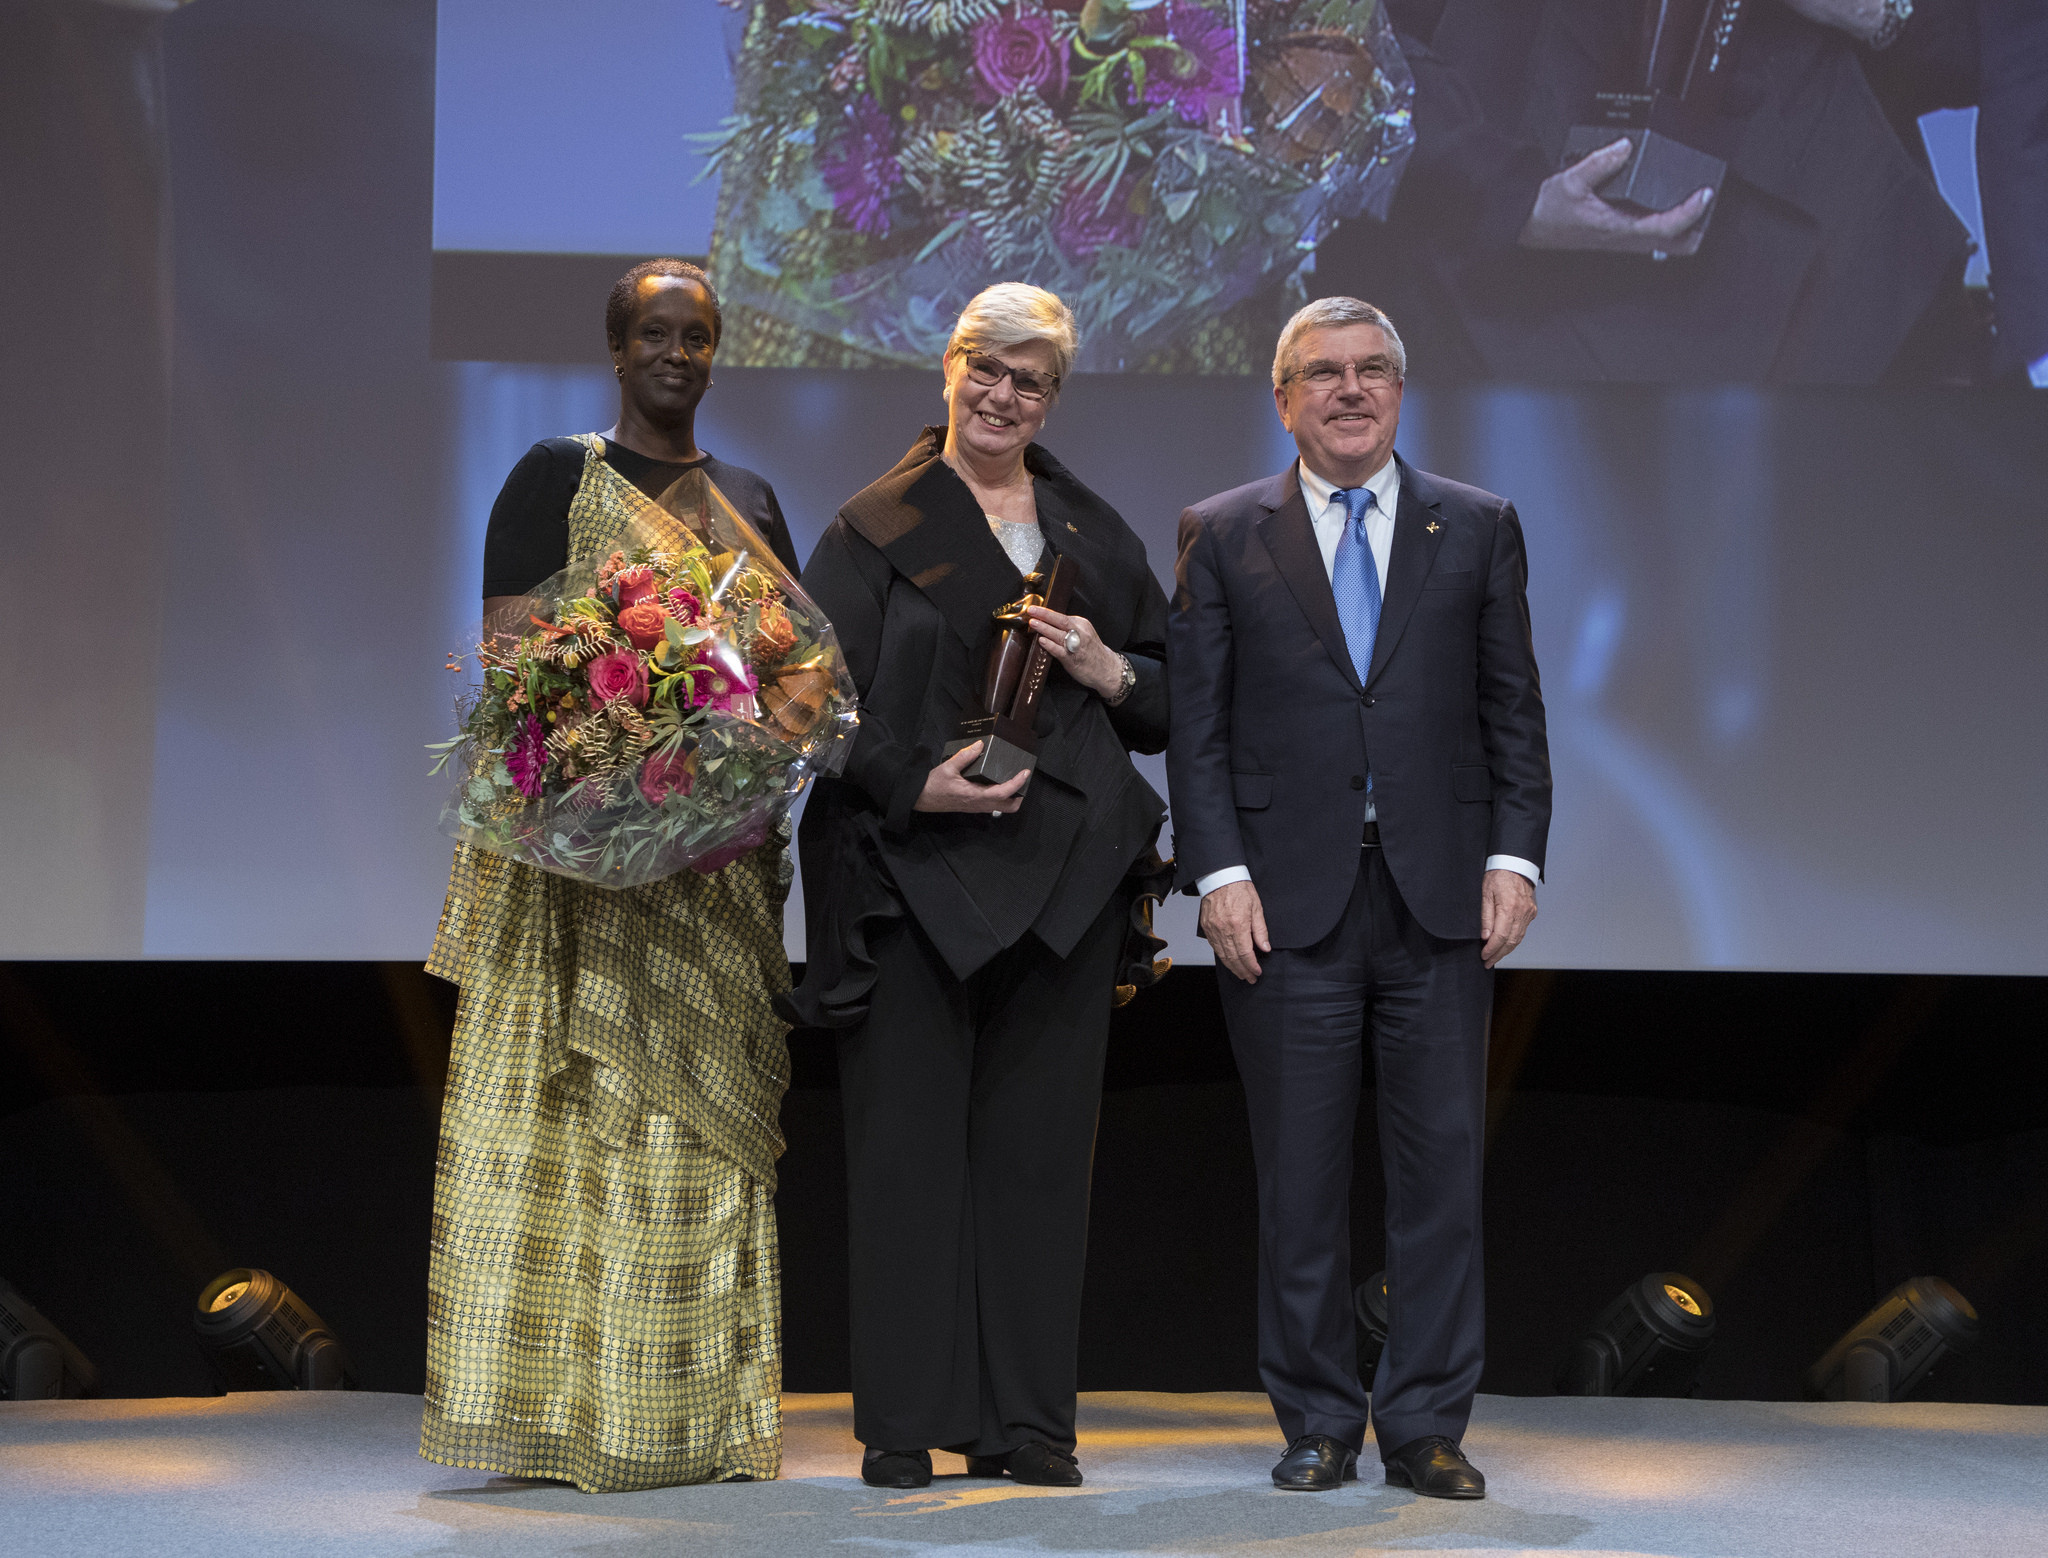 Finnish gender equality advocate wins top prize at IOC Women in Sports Awards